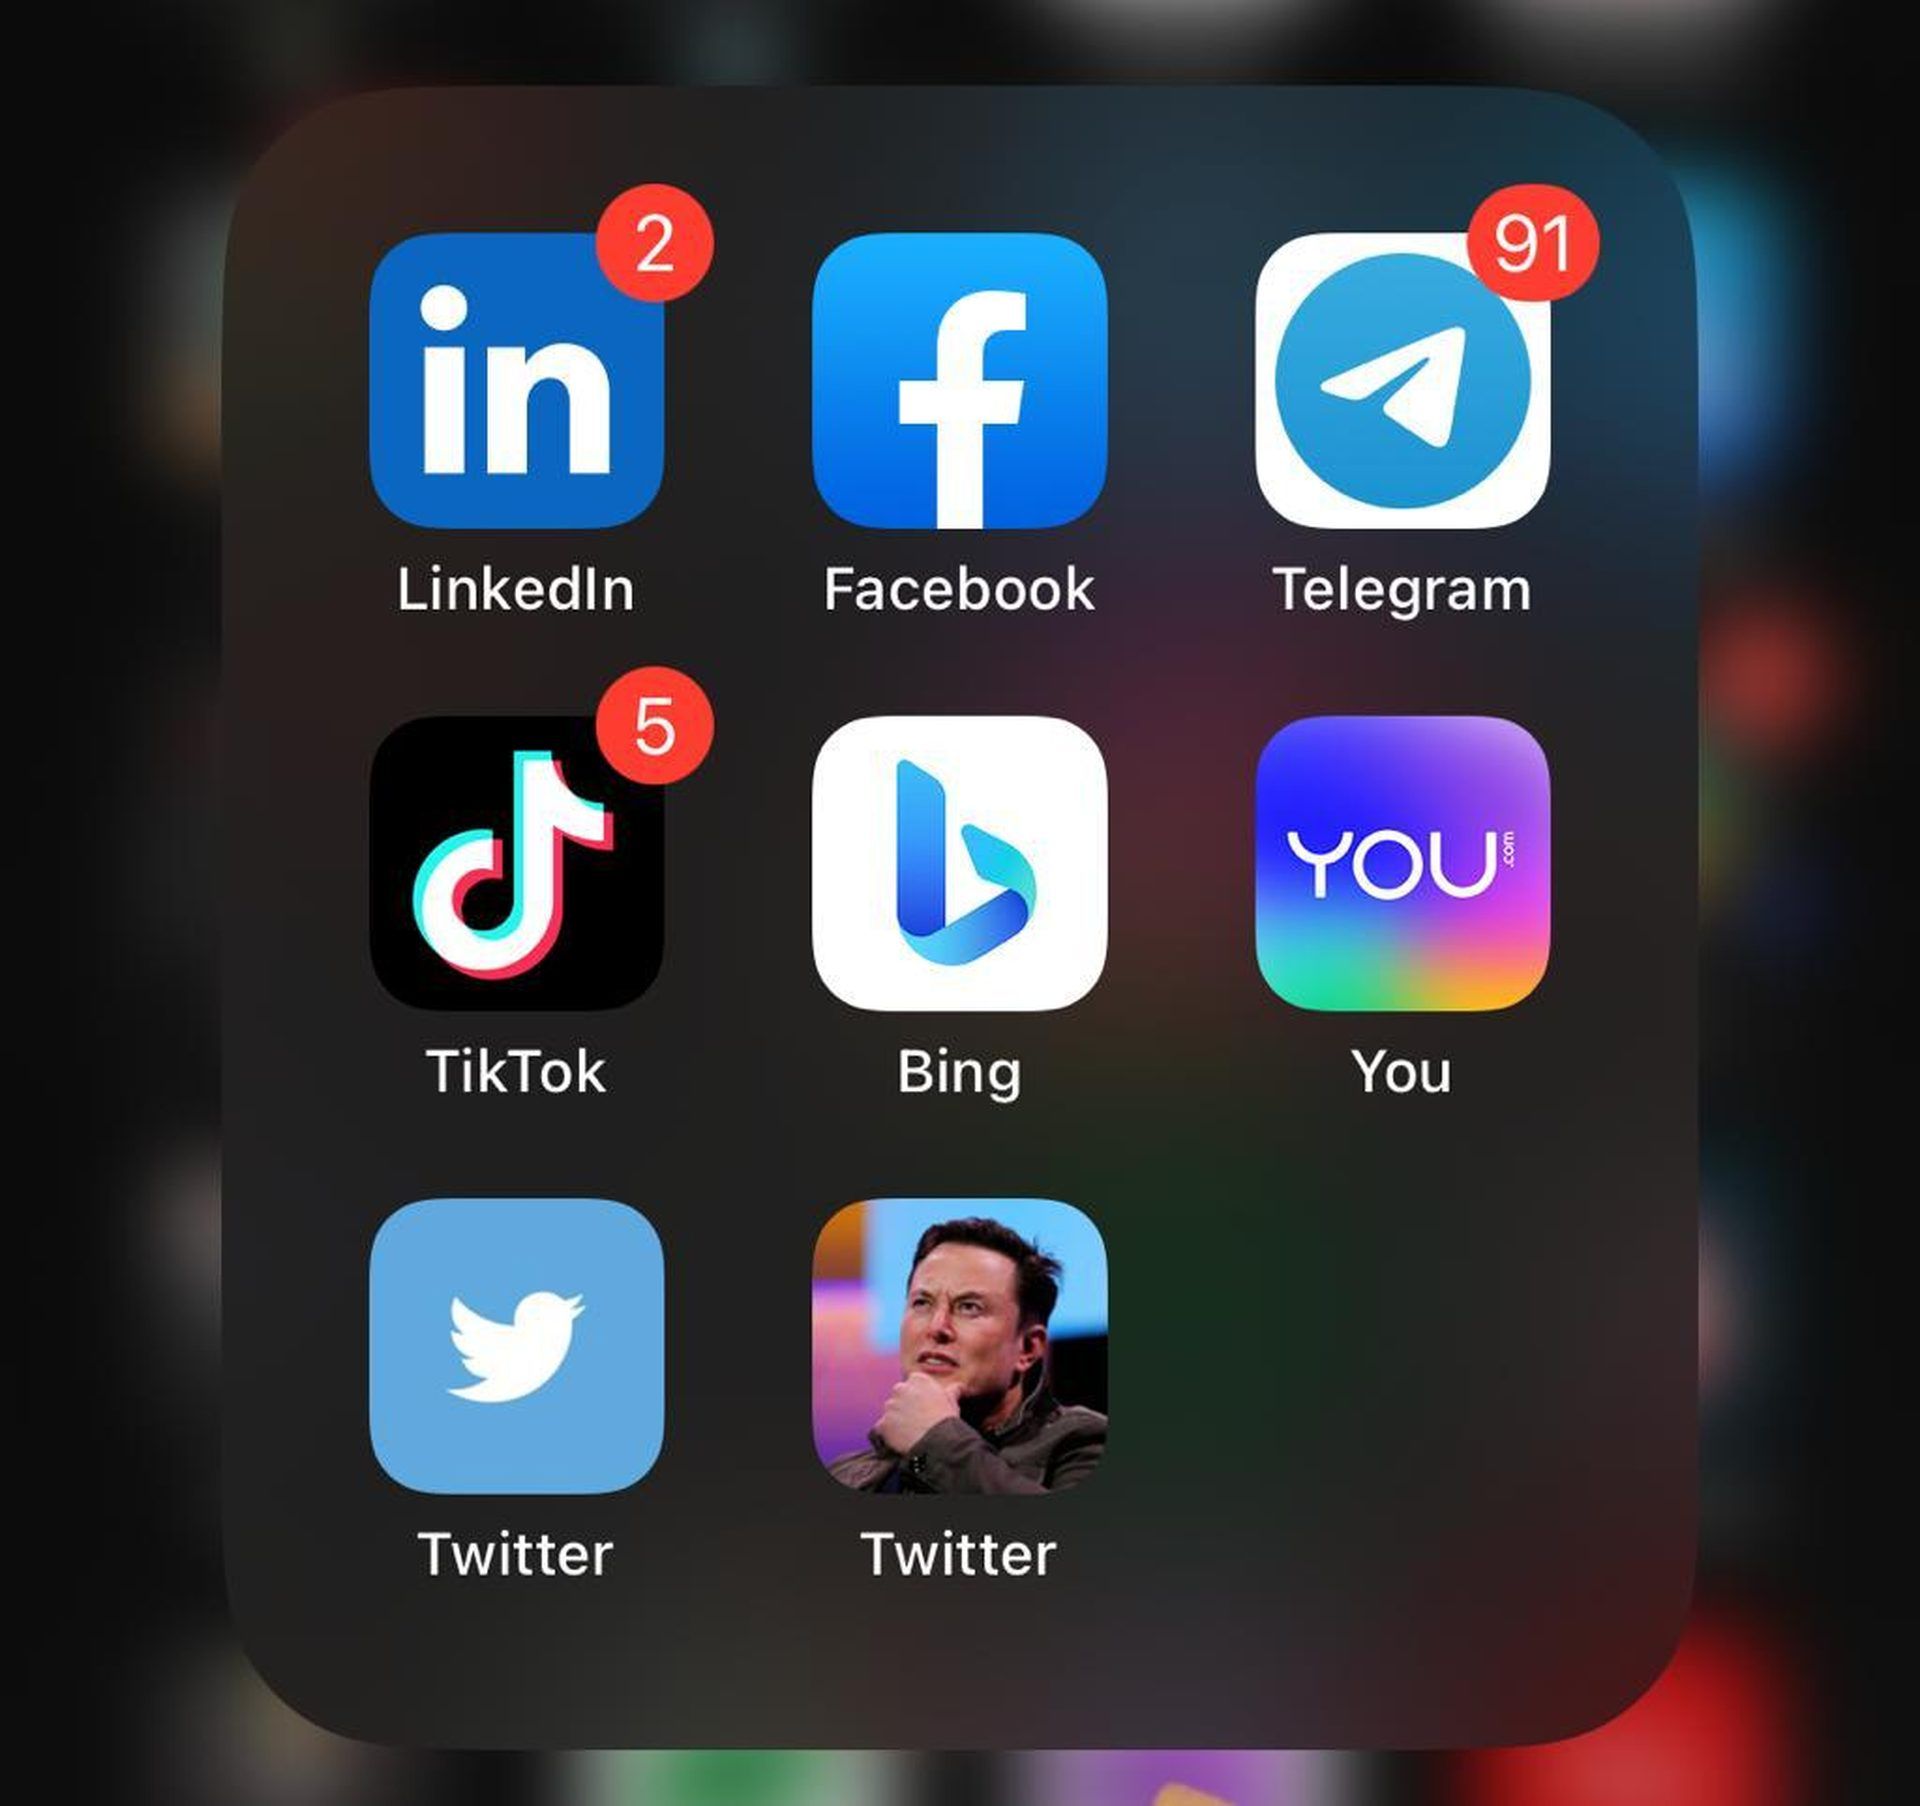 With this article, you can learn how to change Twitter app icon easily on iOS. Keep reading and explore how to deny Musk's Twitter rebranding!